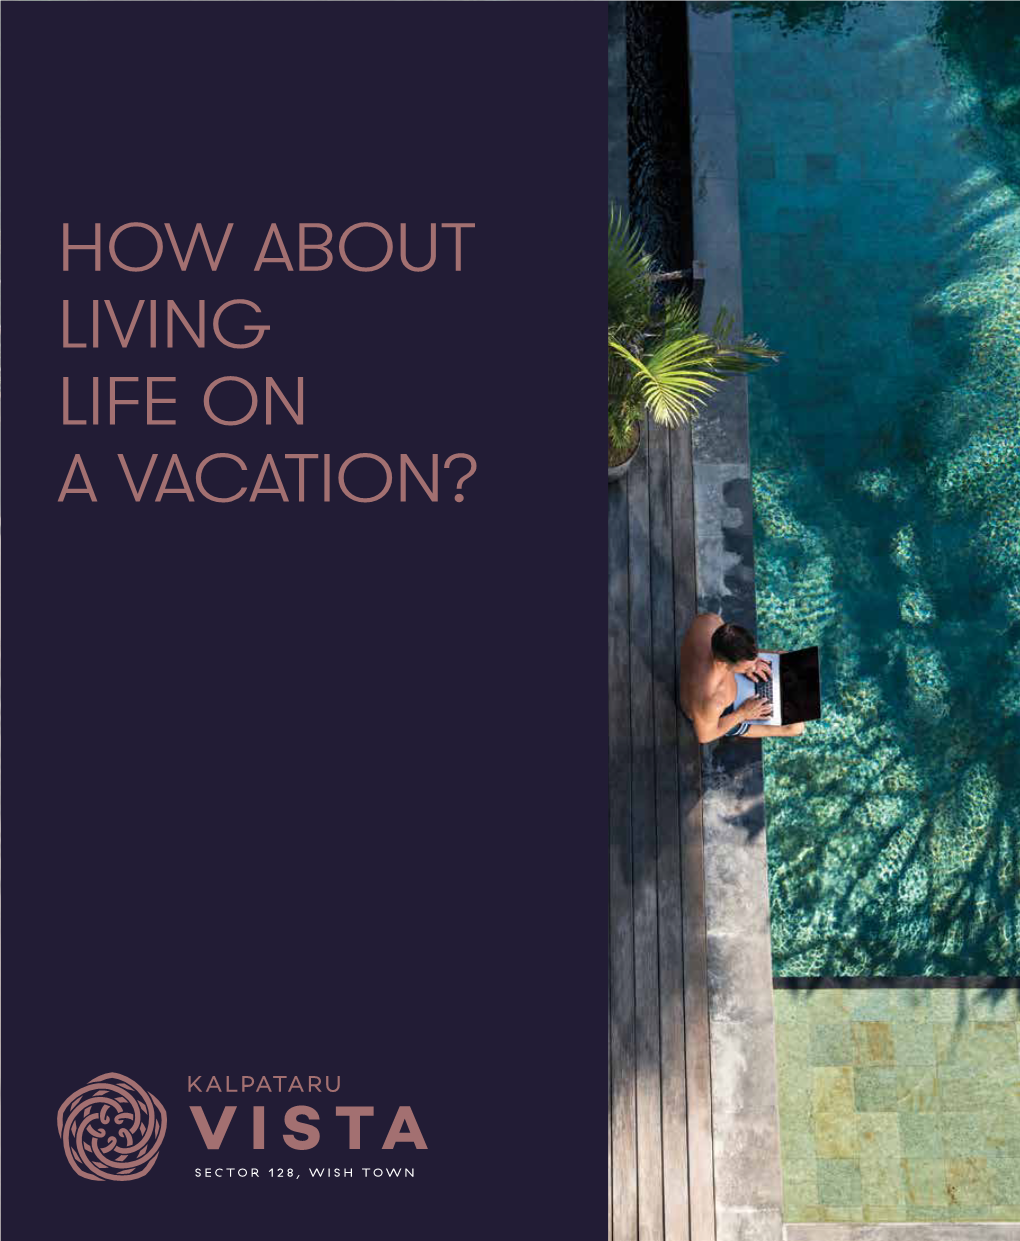 How About Living Life on a Vacation?